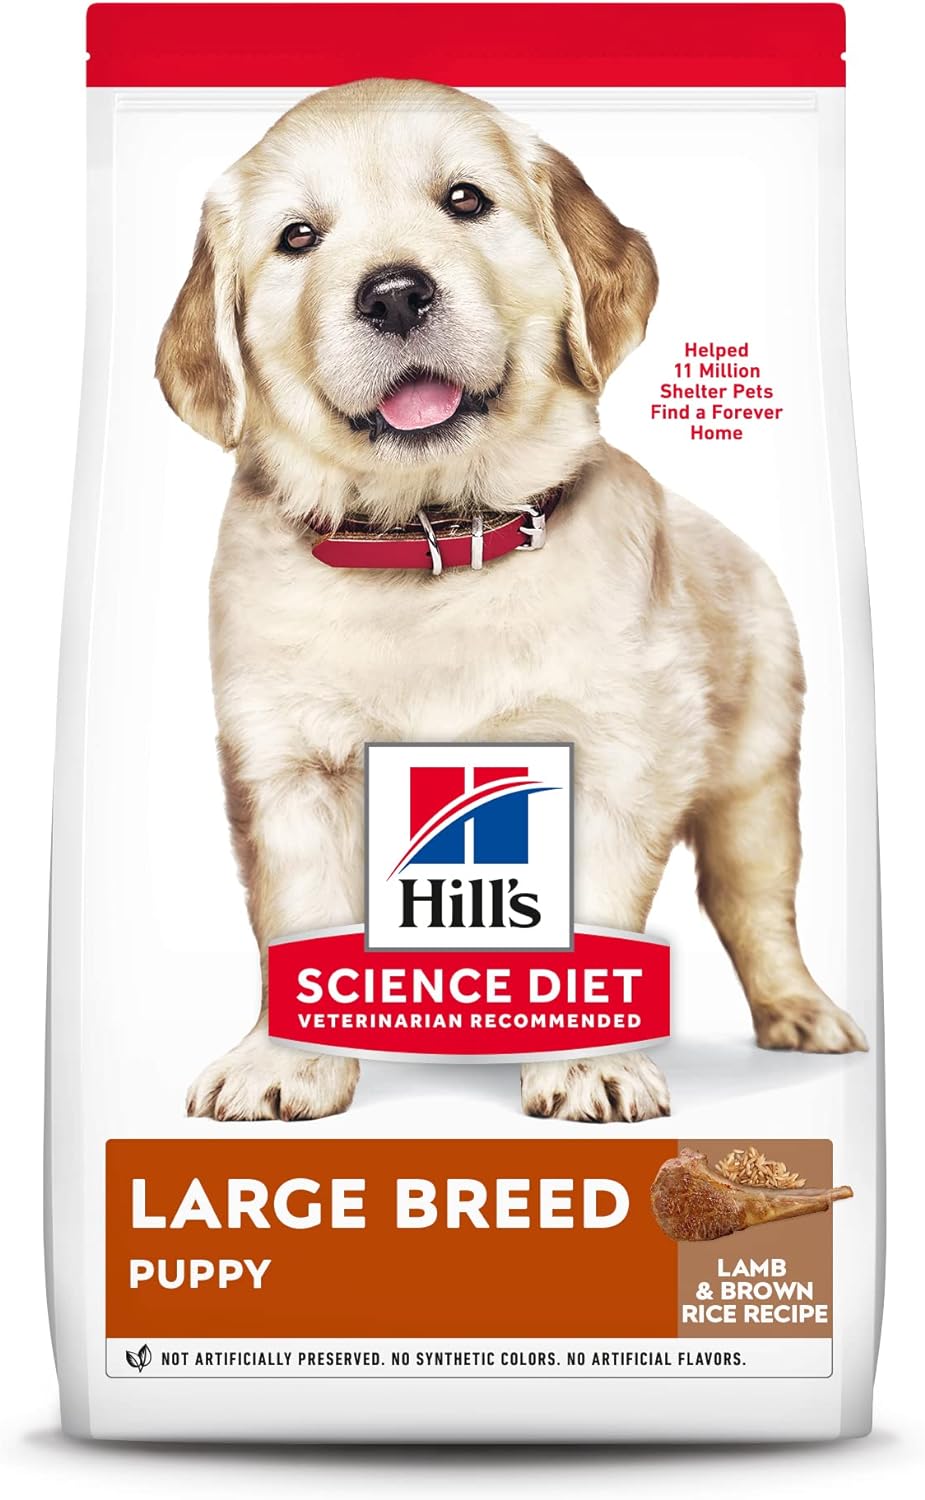 Hill’s Science Diet Puppy Large Breed Lamb Meal & Brown Rice Recipe Dry Dog Food – Gallery Image 1